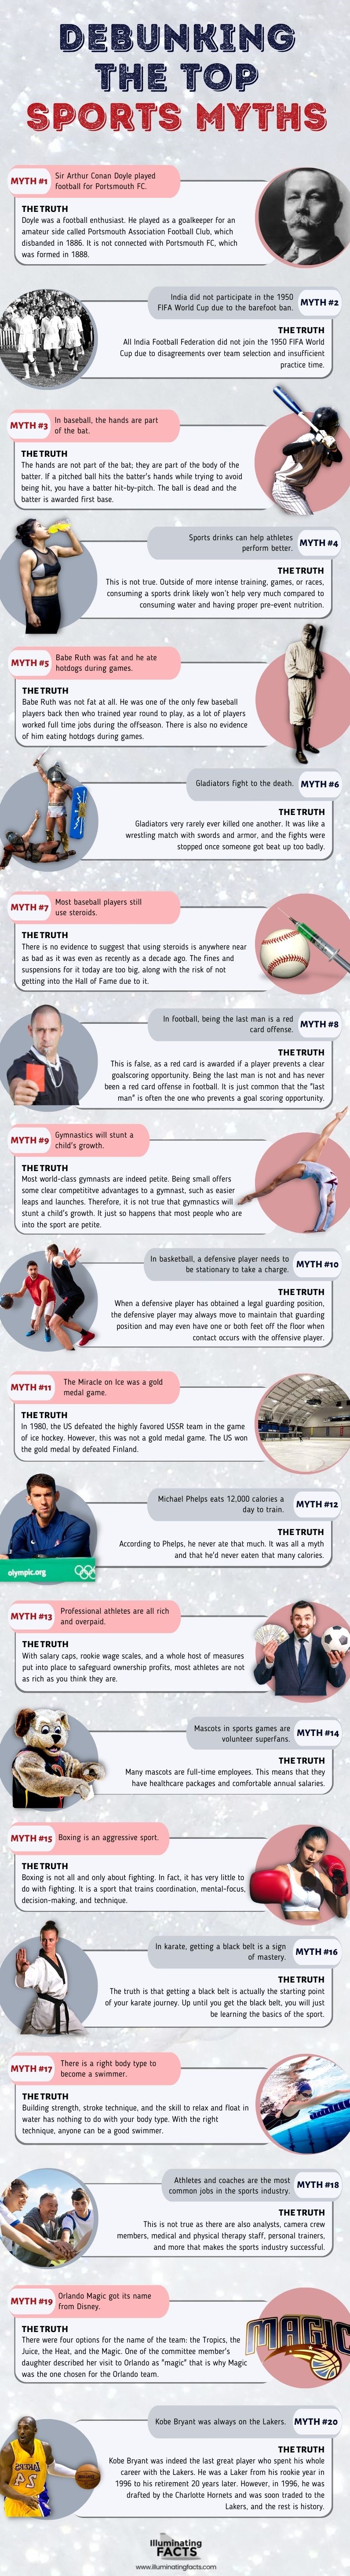 Debunking the Top Sports Myths